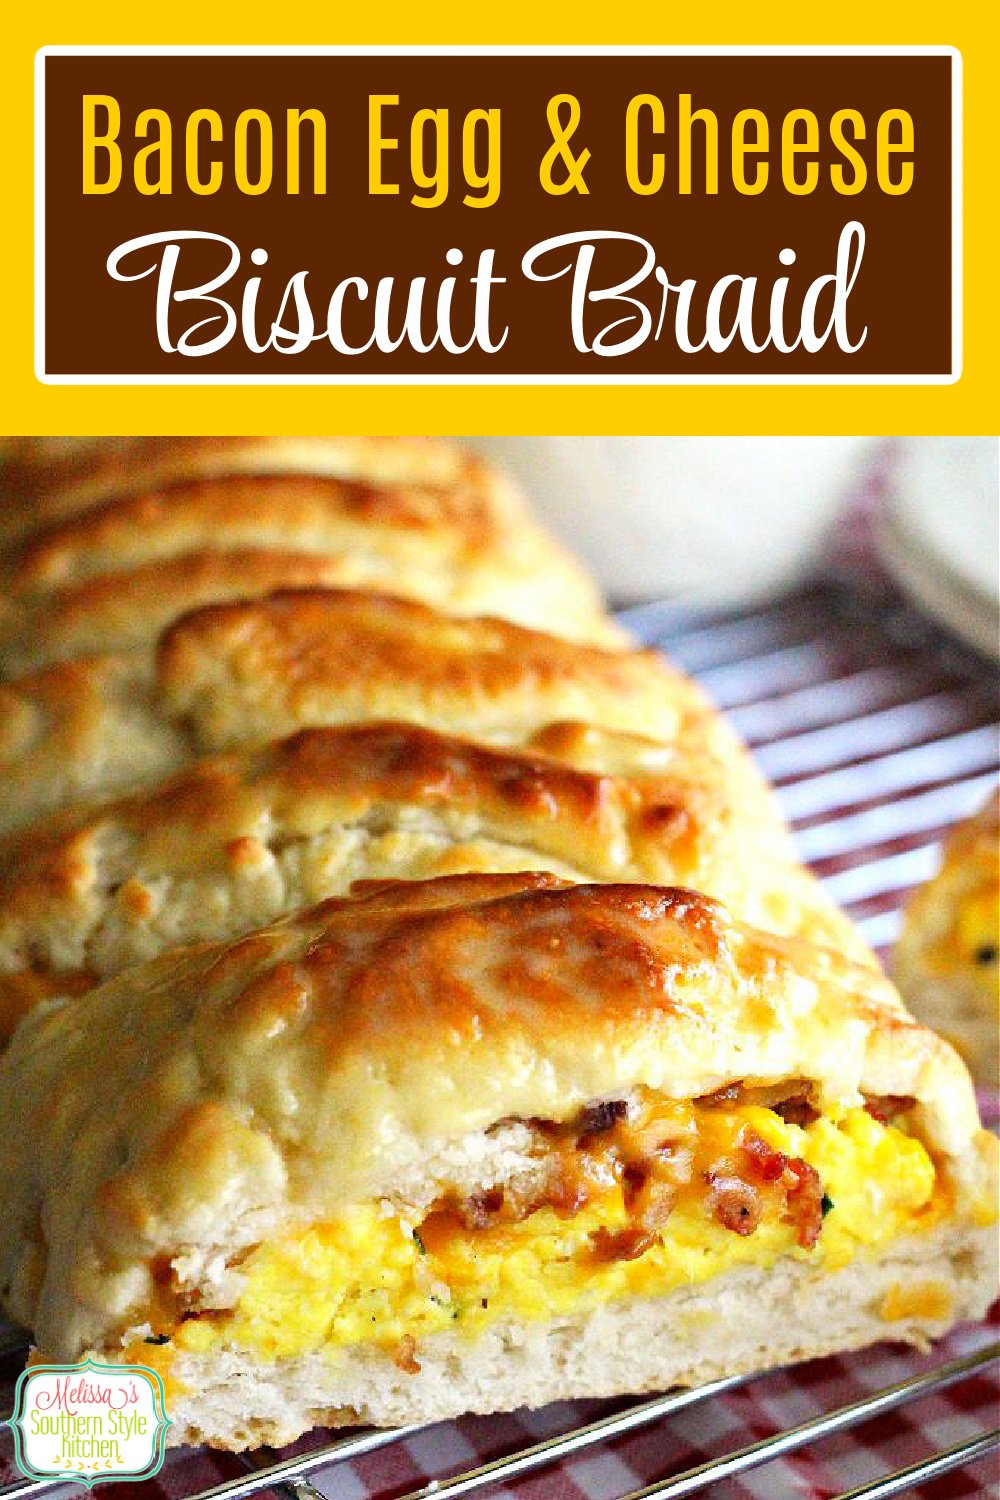 This Bacon Egg and Cheese Biscuit Braid makes a spectacular start to any day #biscuits #biscuitbraid #baconandeggs #bacon #eggs #southernbuttermilkbiscuits #biscuitrecipes #southernfood #breakfast #brunch #holidaybrunch #southernrecipes via @melissasssk